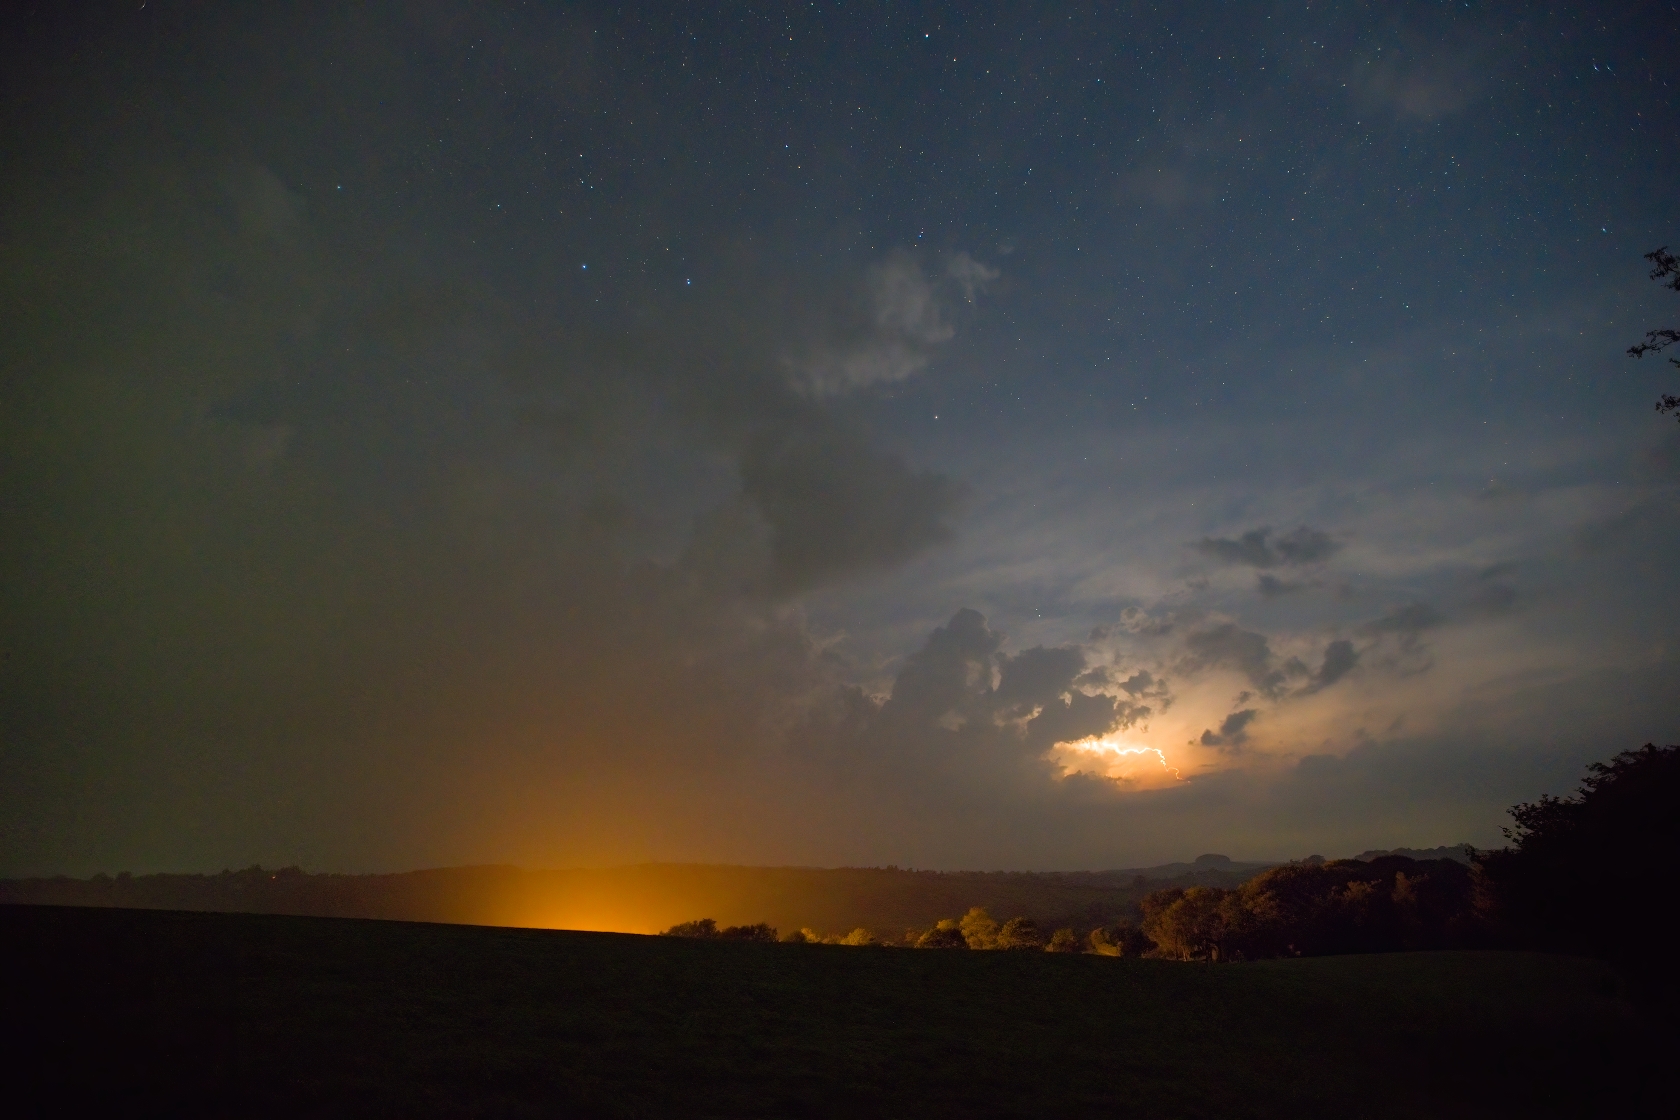 Thunderstorms over Dolau, Penybont in Wales